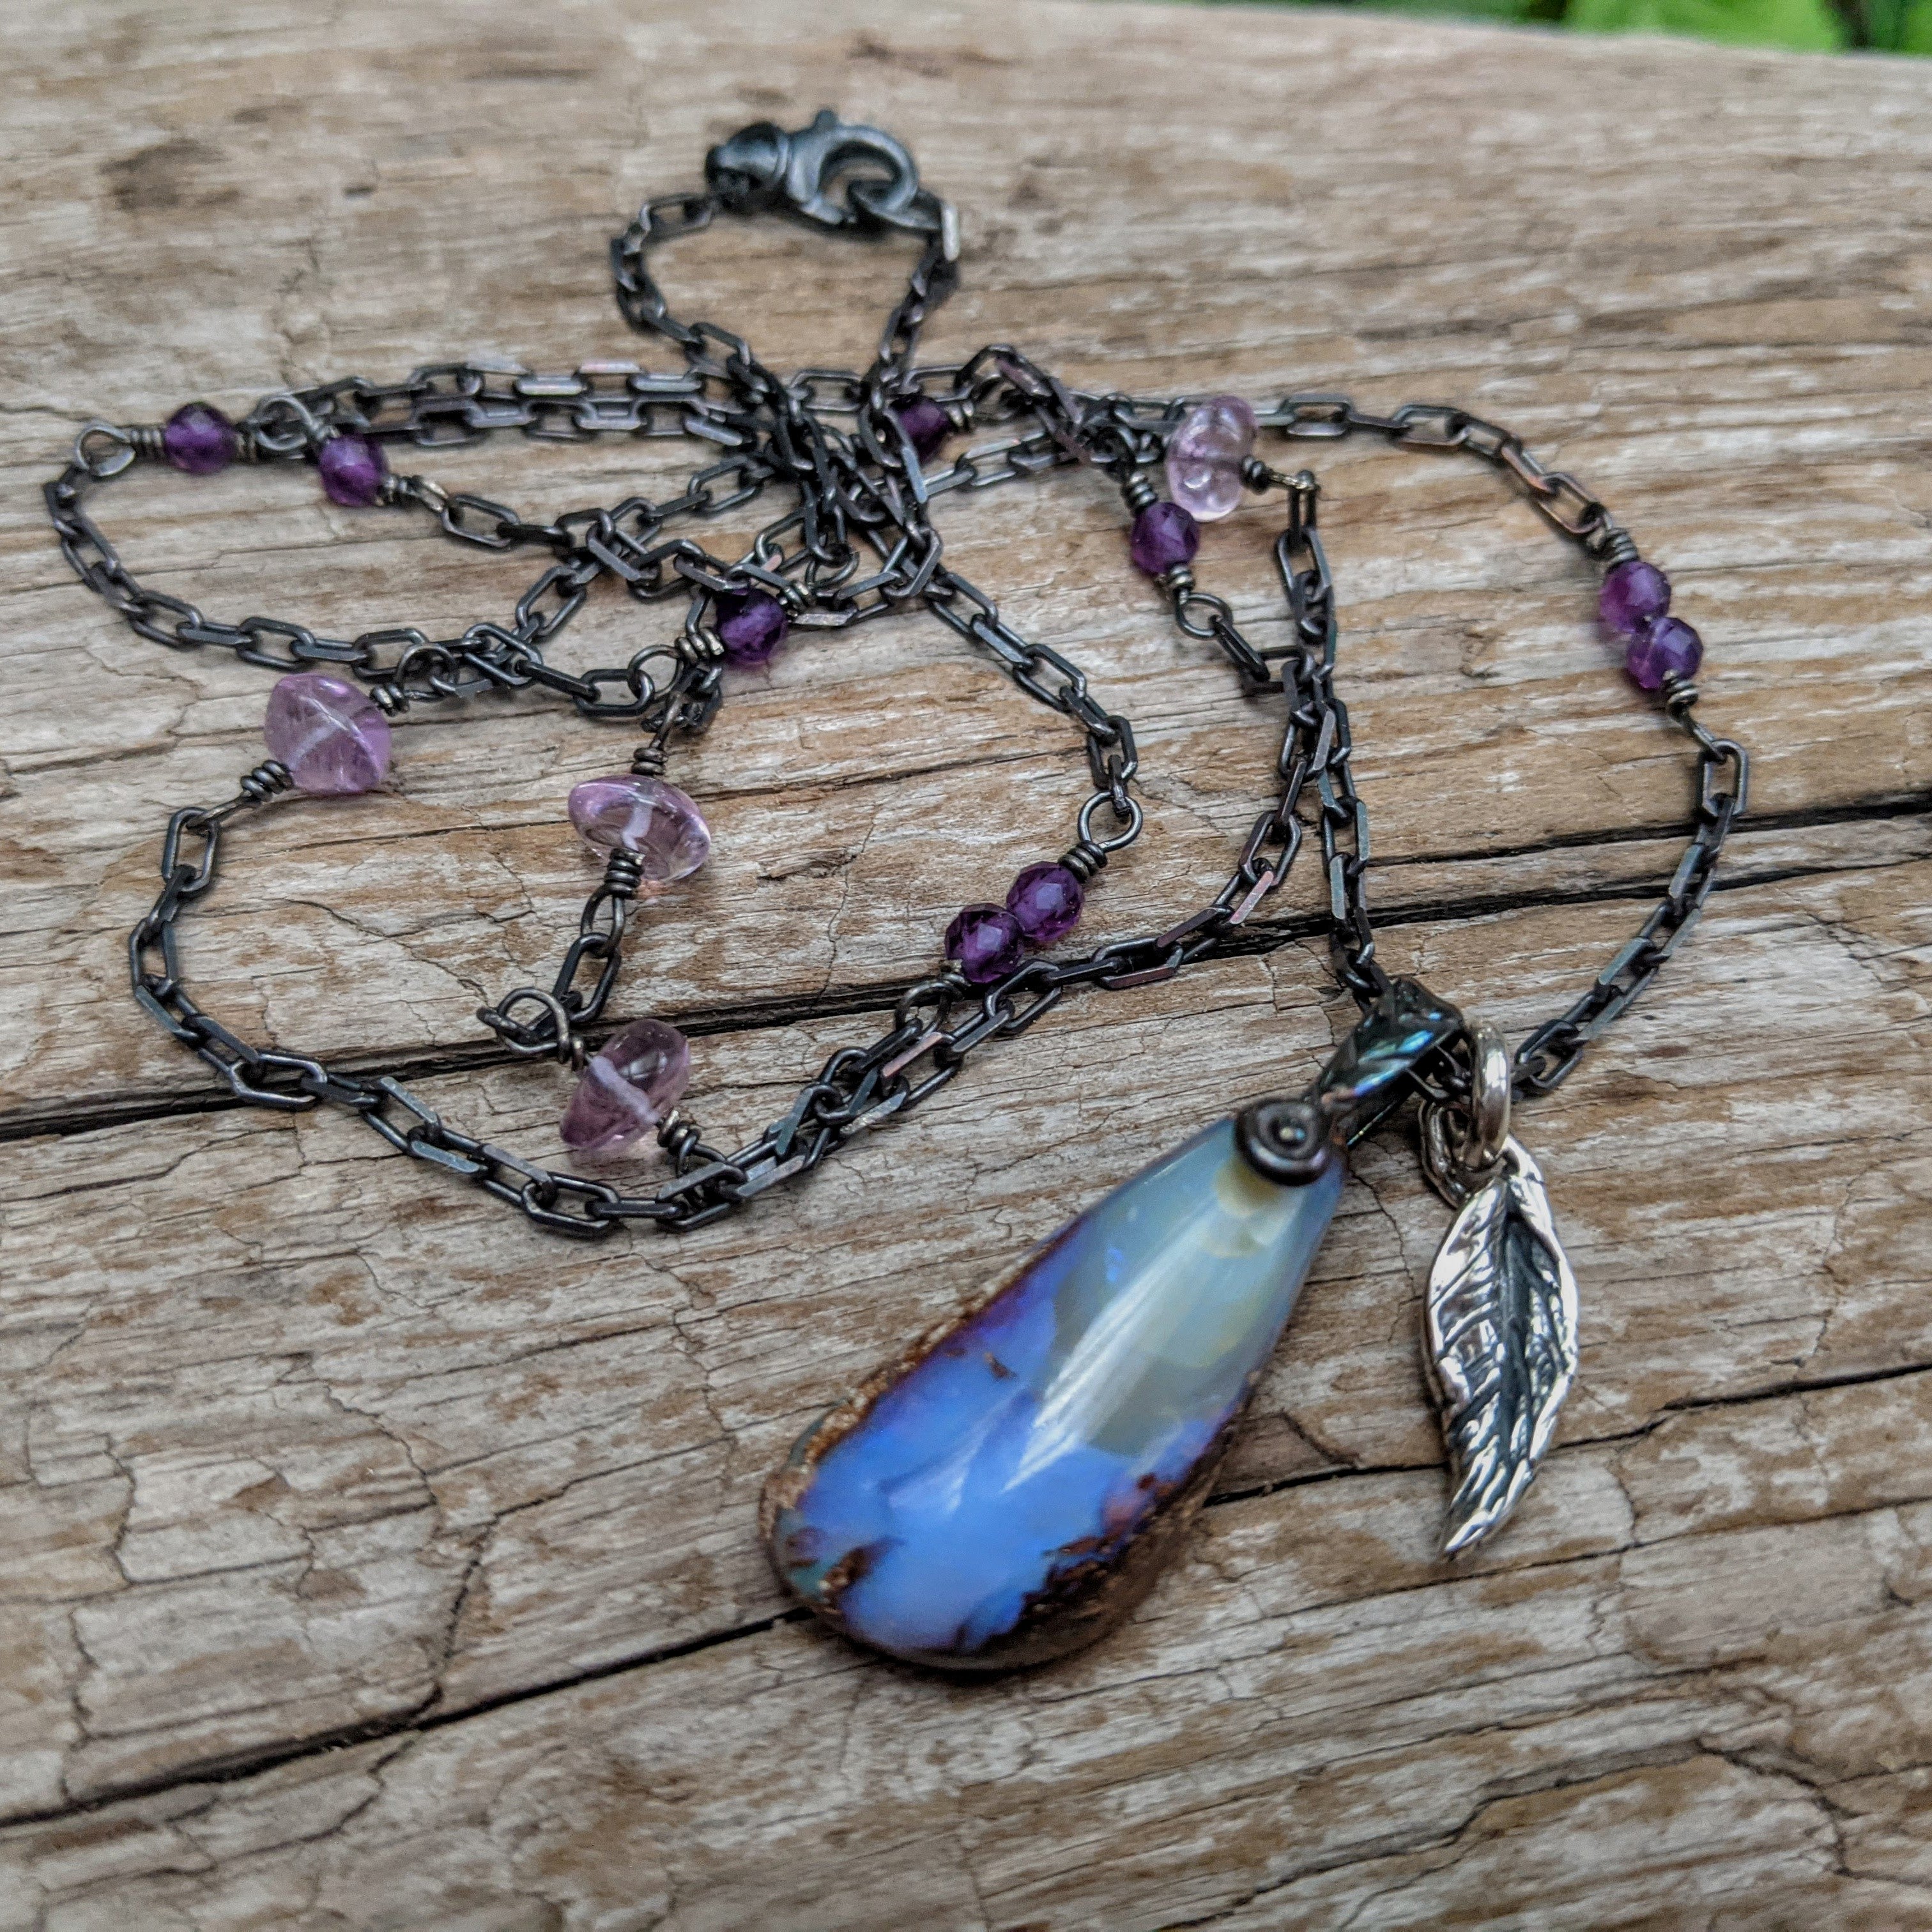 Genuine Australian Wood Replacement Koroit Boulder Opal Pendant Necklace, organic jewelry, gemstone necklace, statement, sophisticated necklace. Handcrafted by Aurora Creative Jewellery.